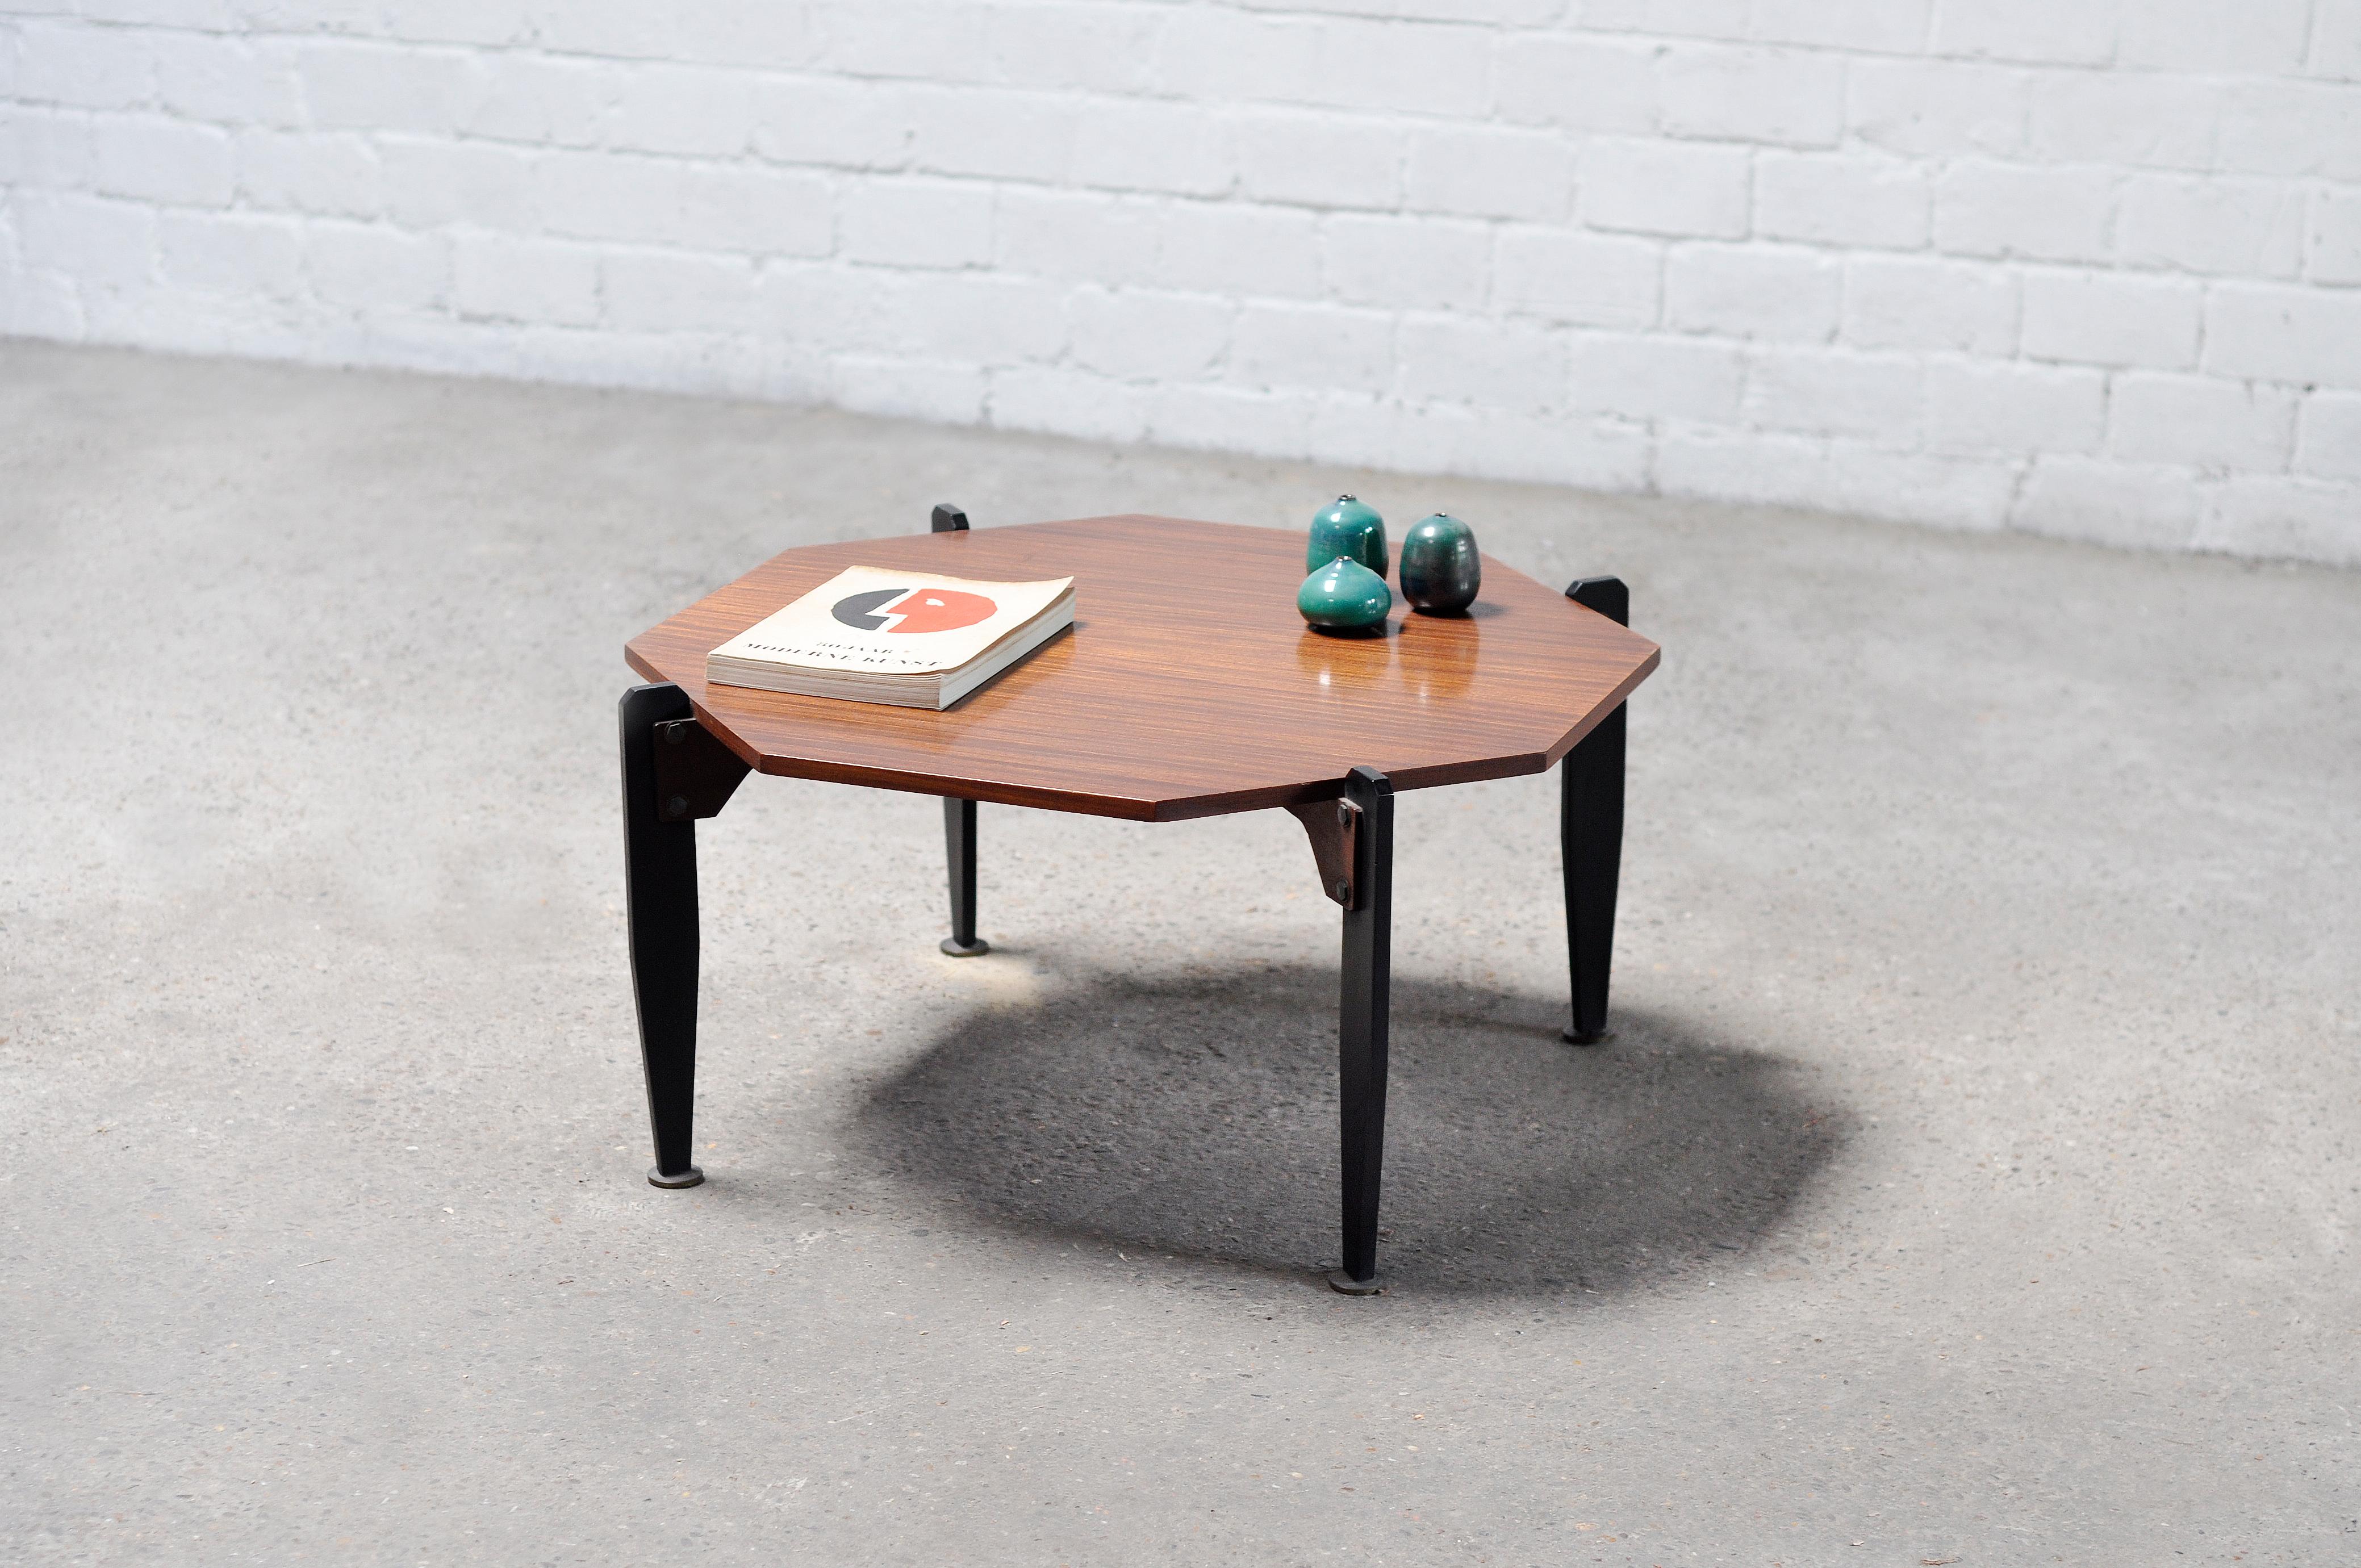 Italian Modernist Coffee Table in Teak And Lacquered Metal, 1950s For Sale 3